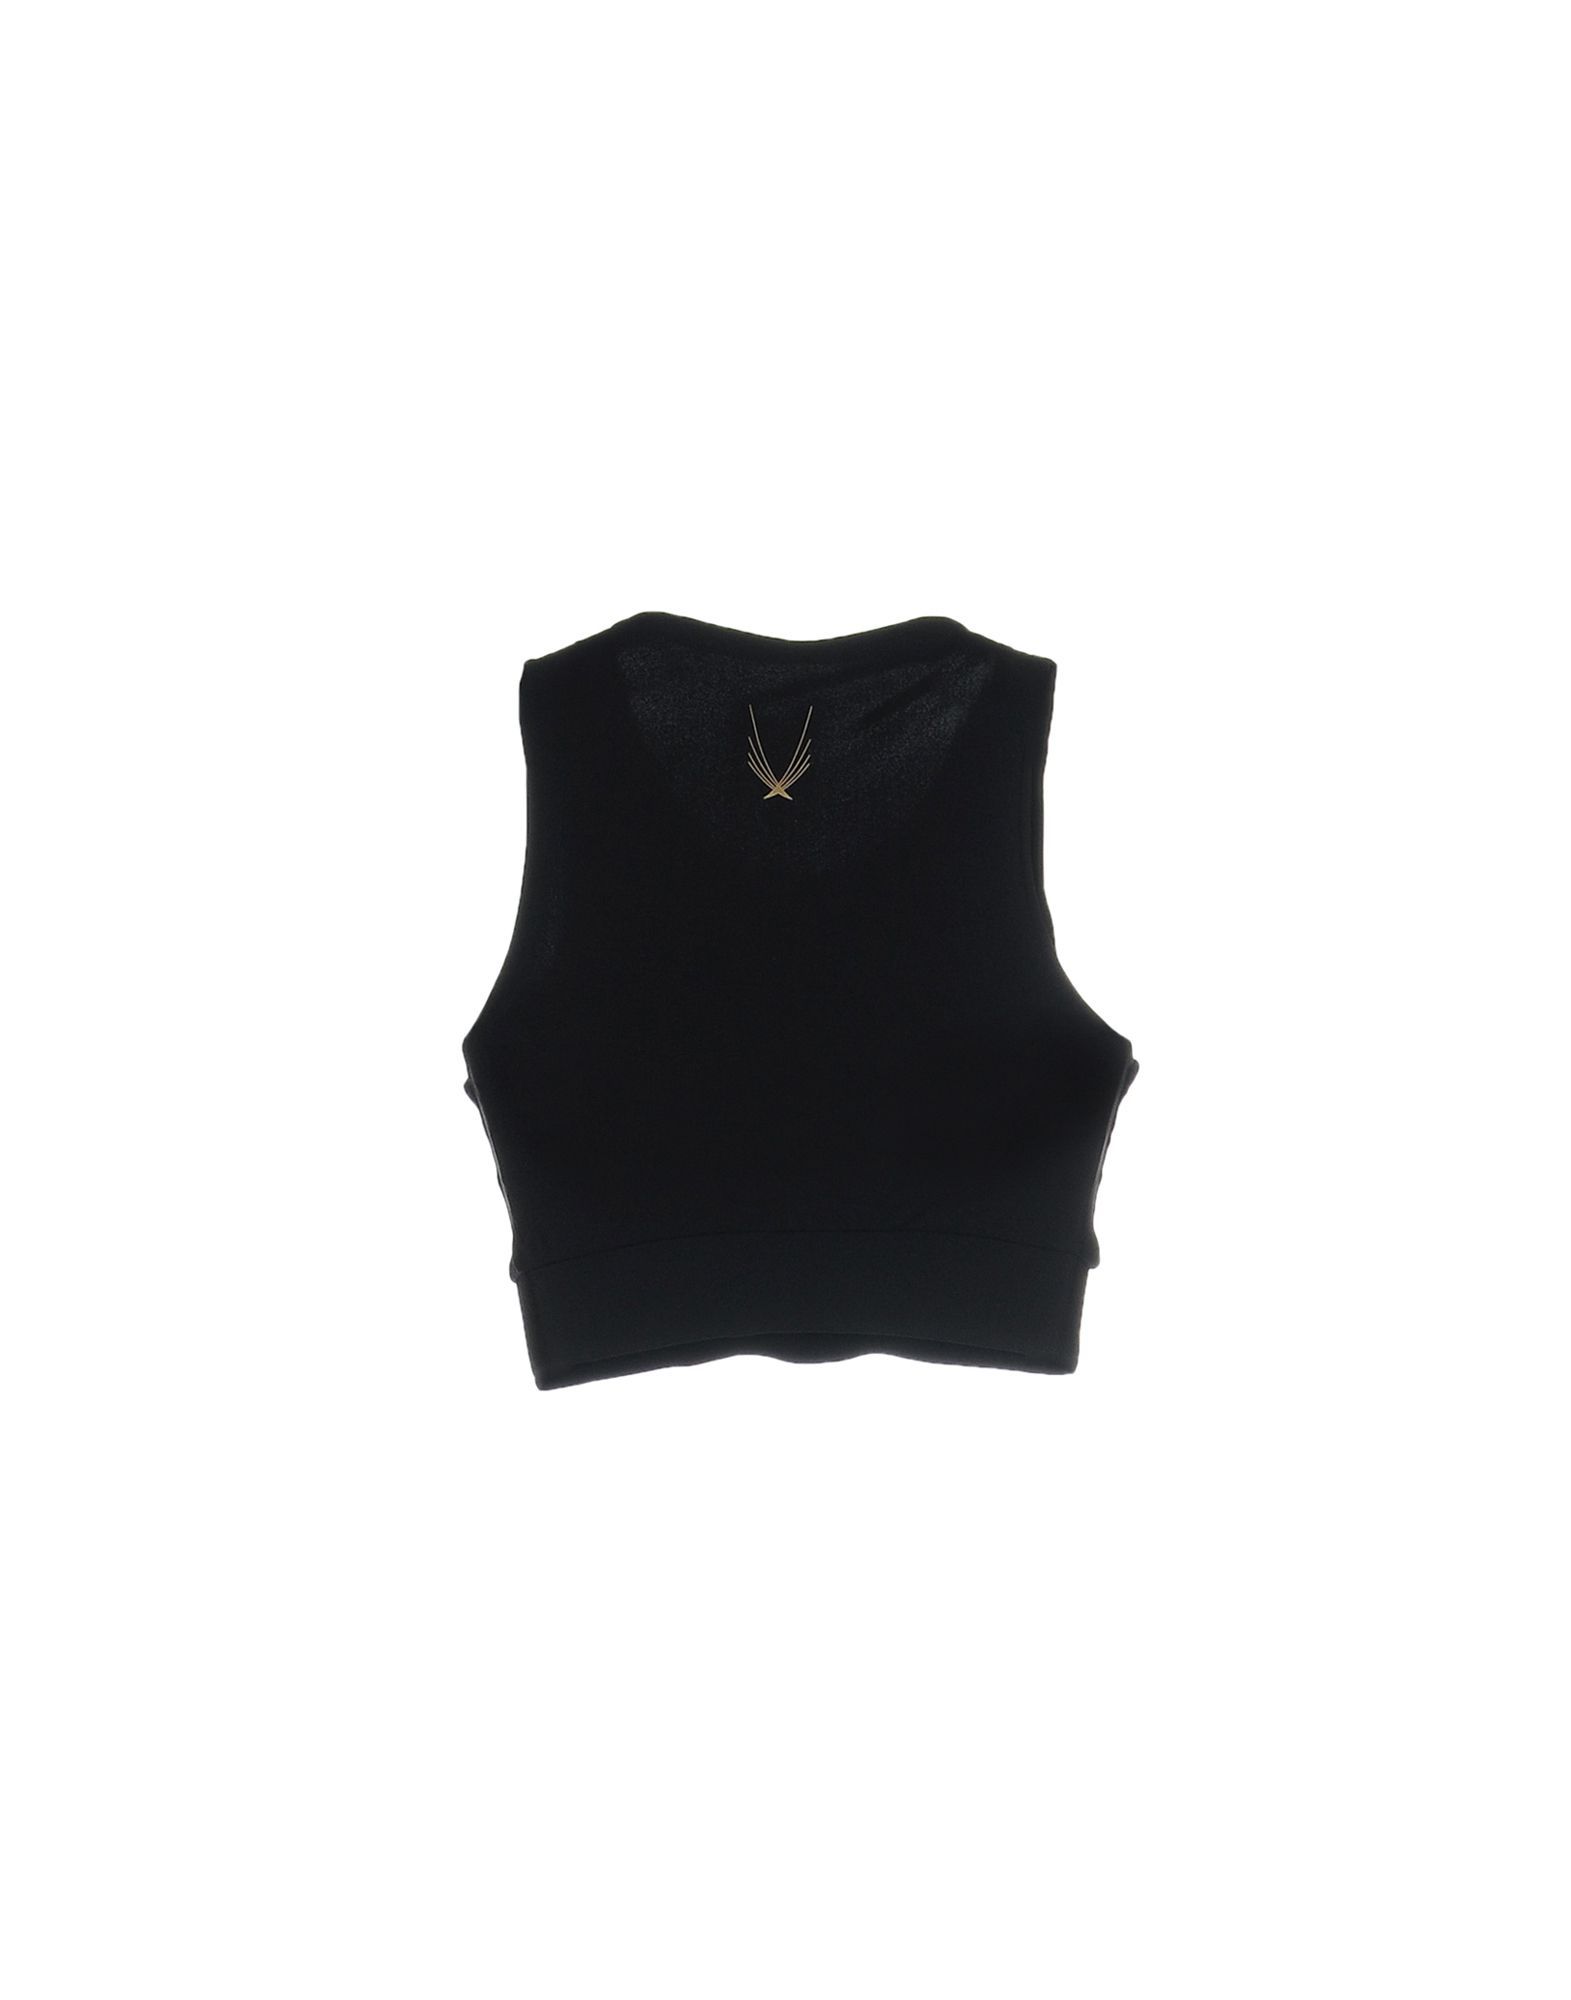 Jersey<br>Iridescent effect<br>Logo<br>Print<br>Solid colour<br>Round collar<br>Sleeveless<br>No pockets<br>Stretch<br>Small sized<br>